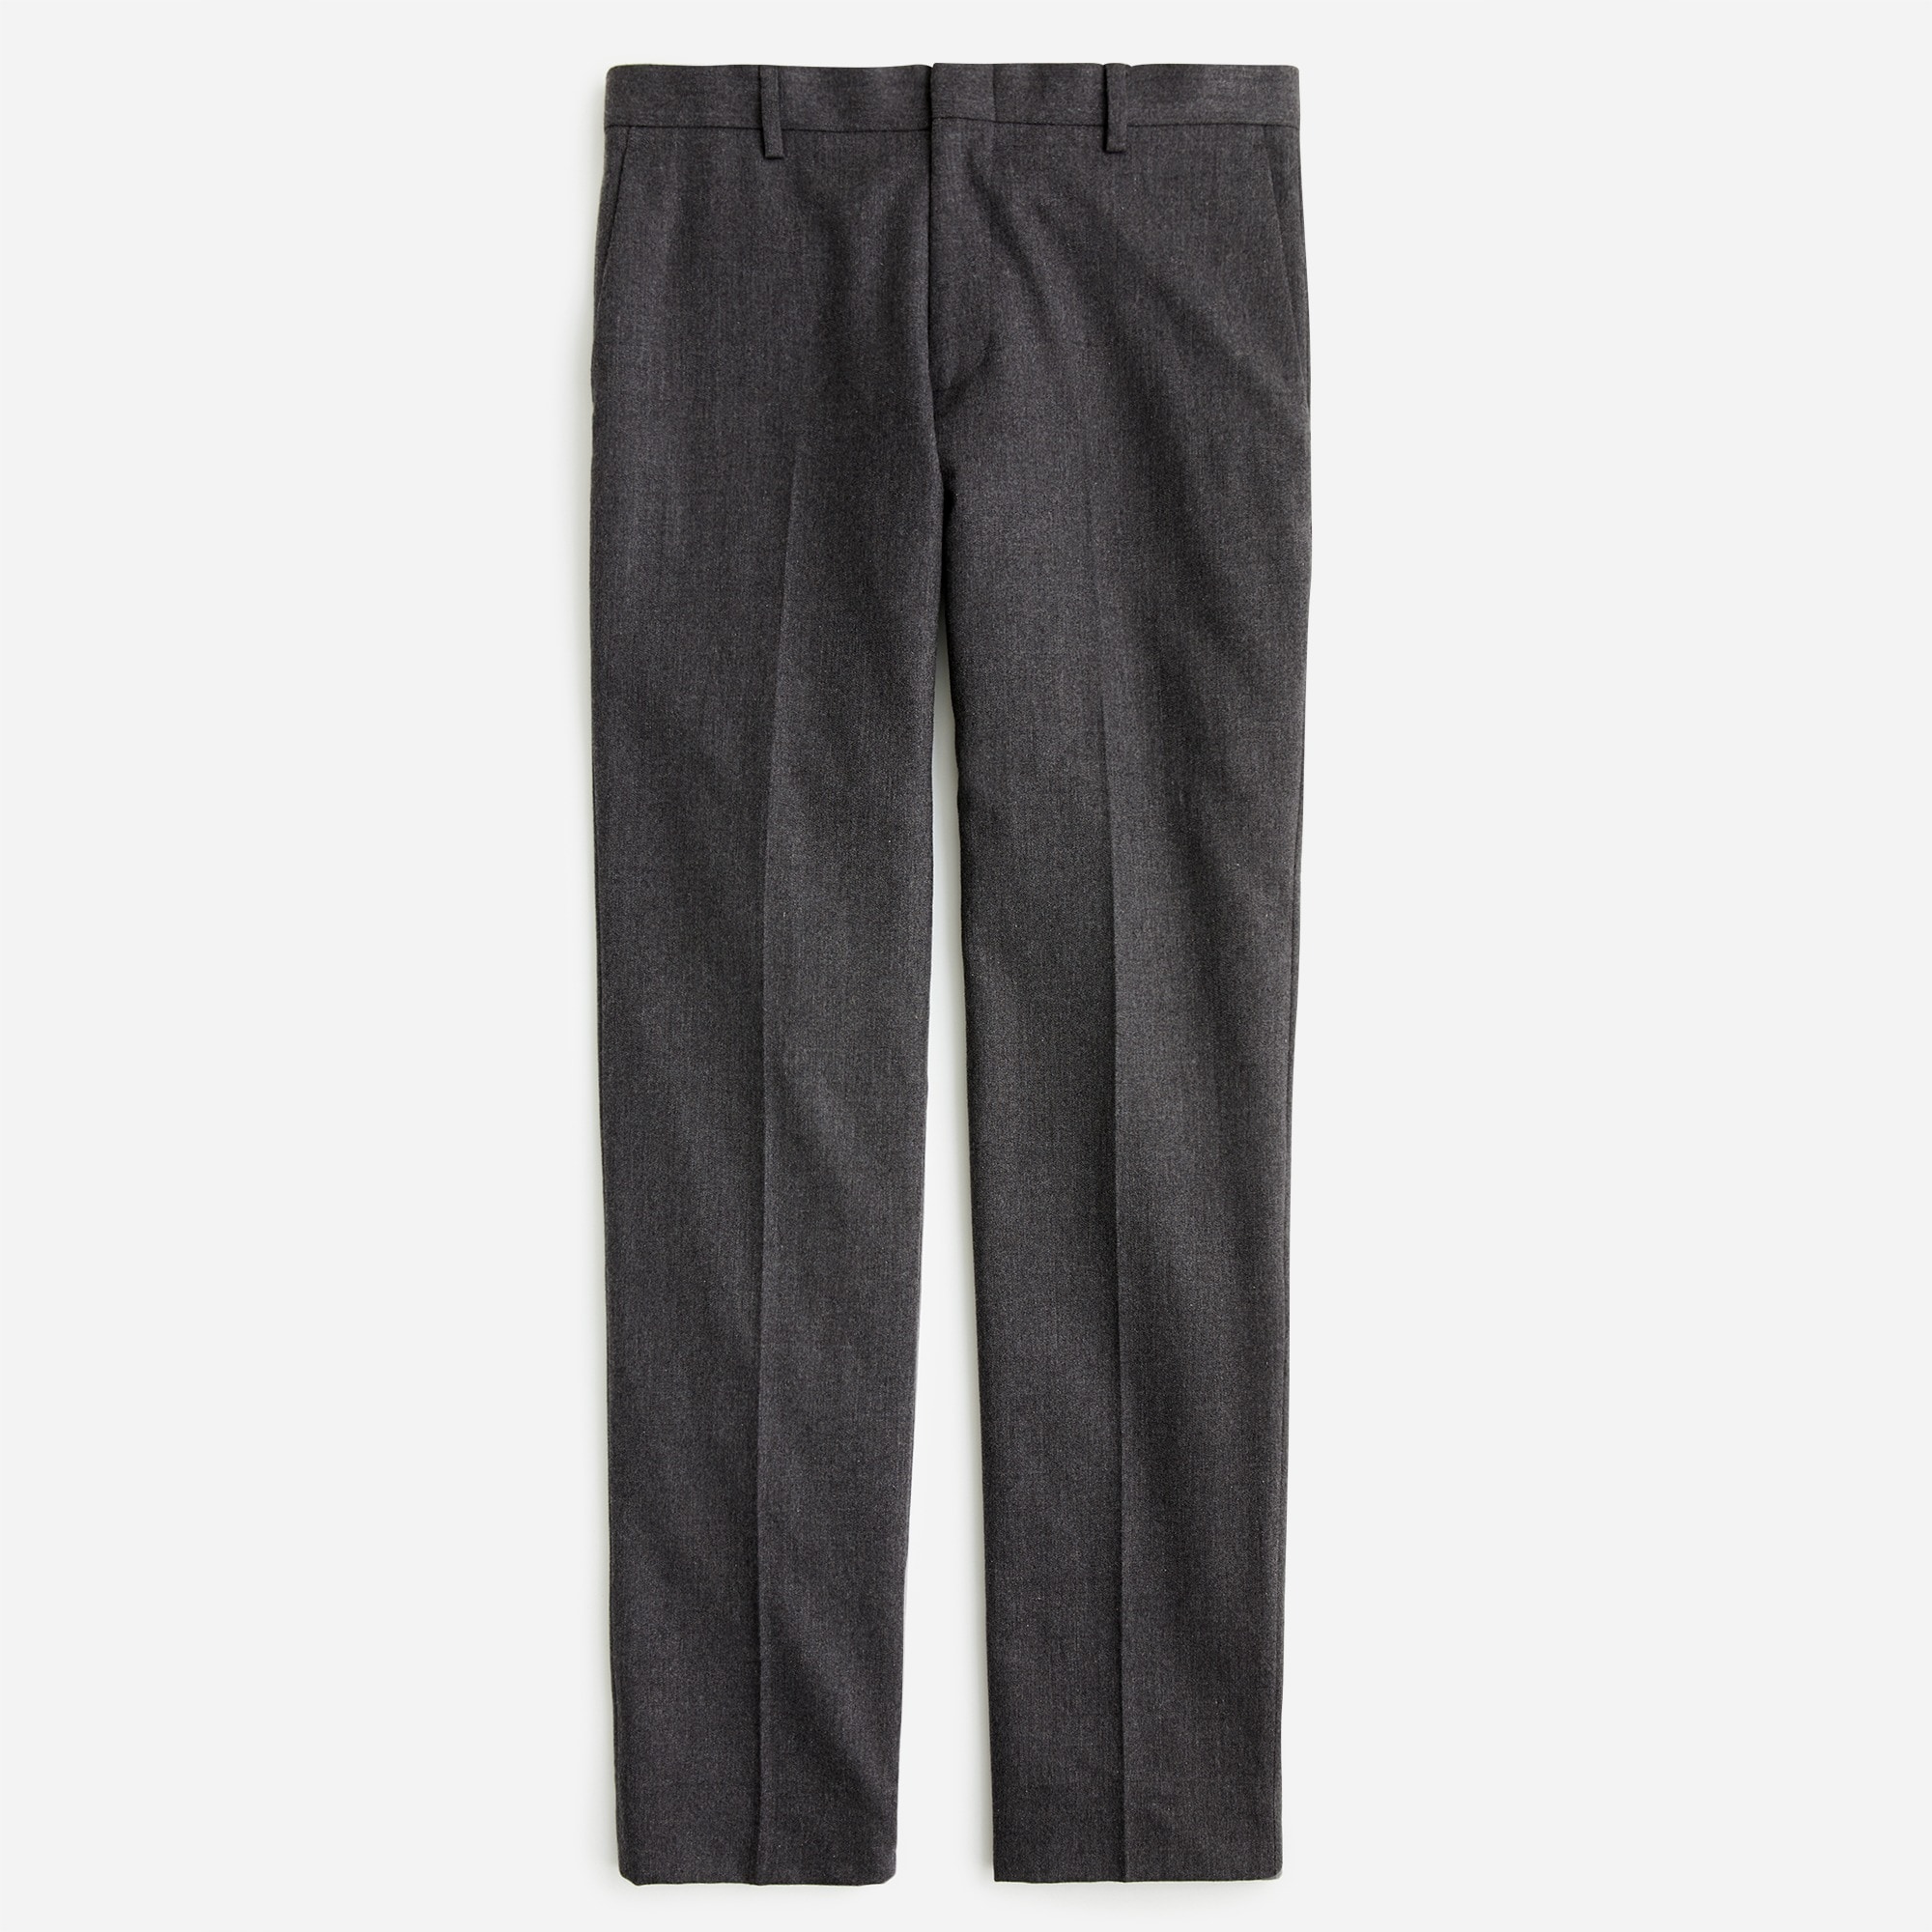  Ludlow Slim-fit unstructured suit pant in English cotton-wool blend  twill